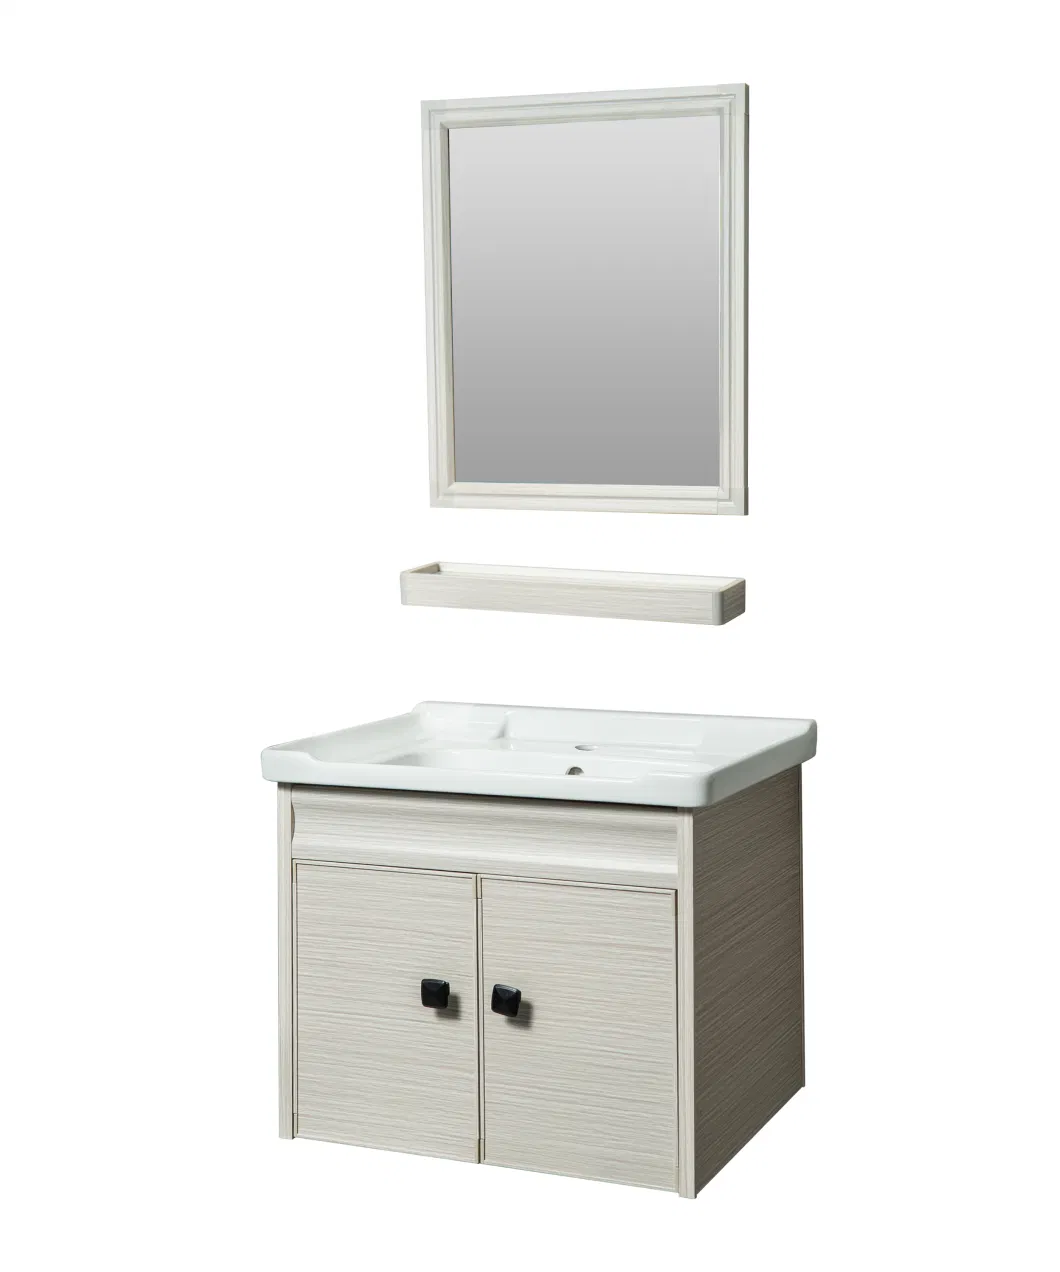 Light Wood Grain Color Contracted Floor Style Bathroom Cabinet with Mirror